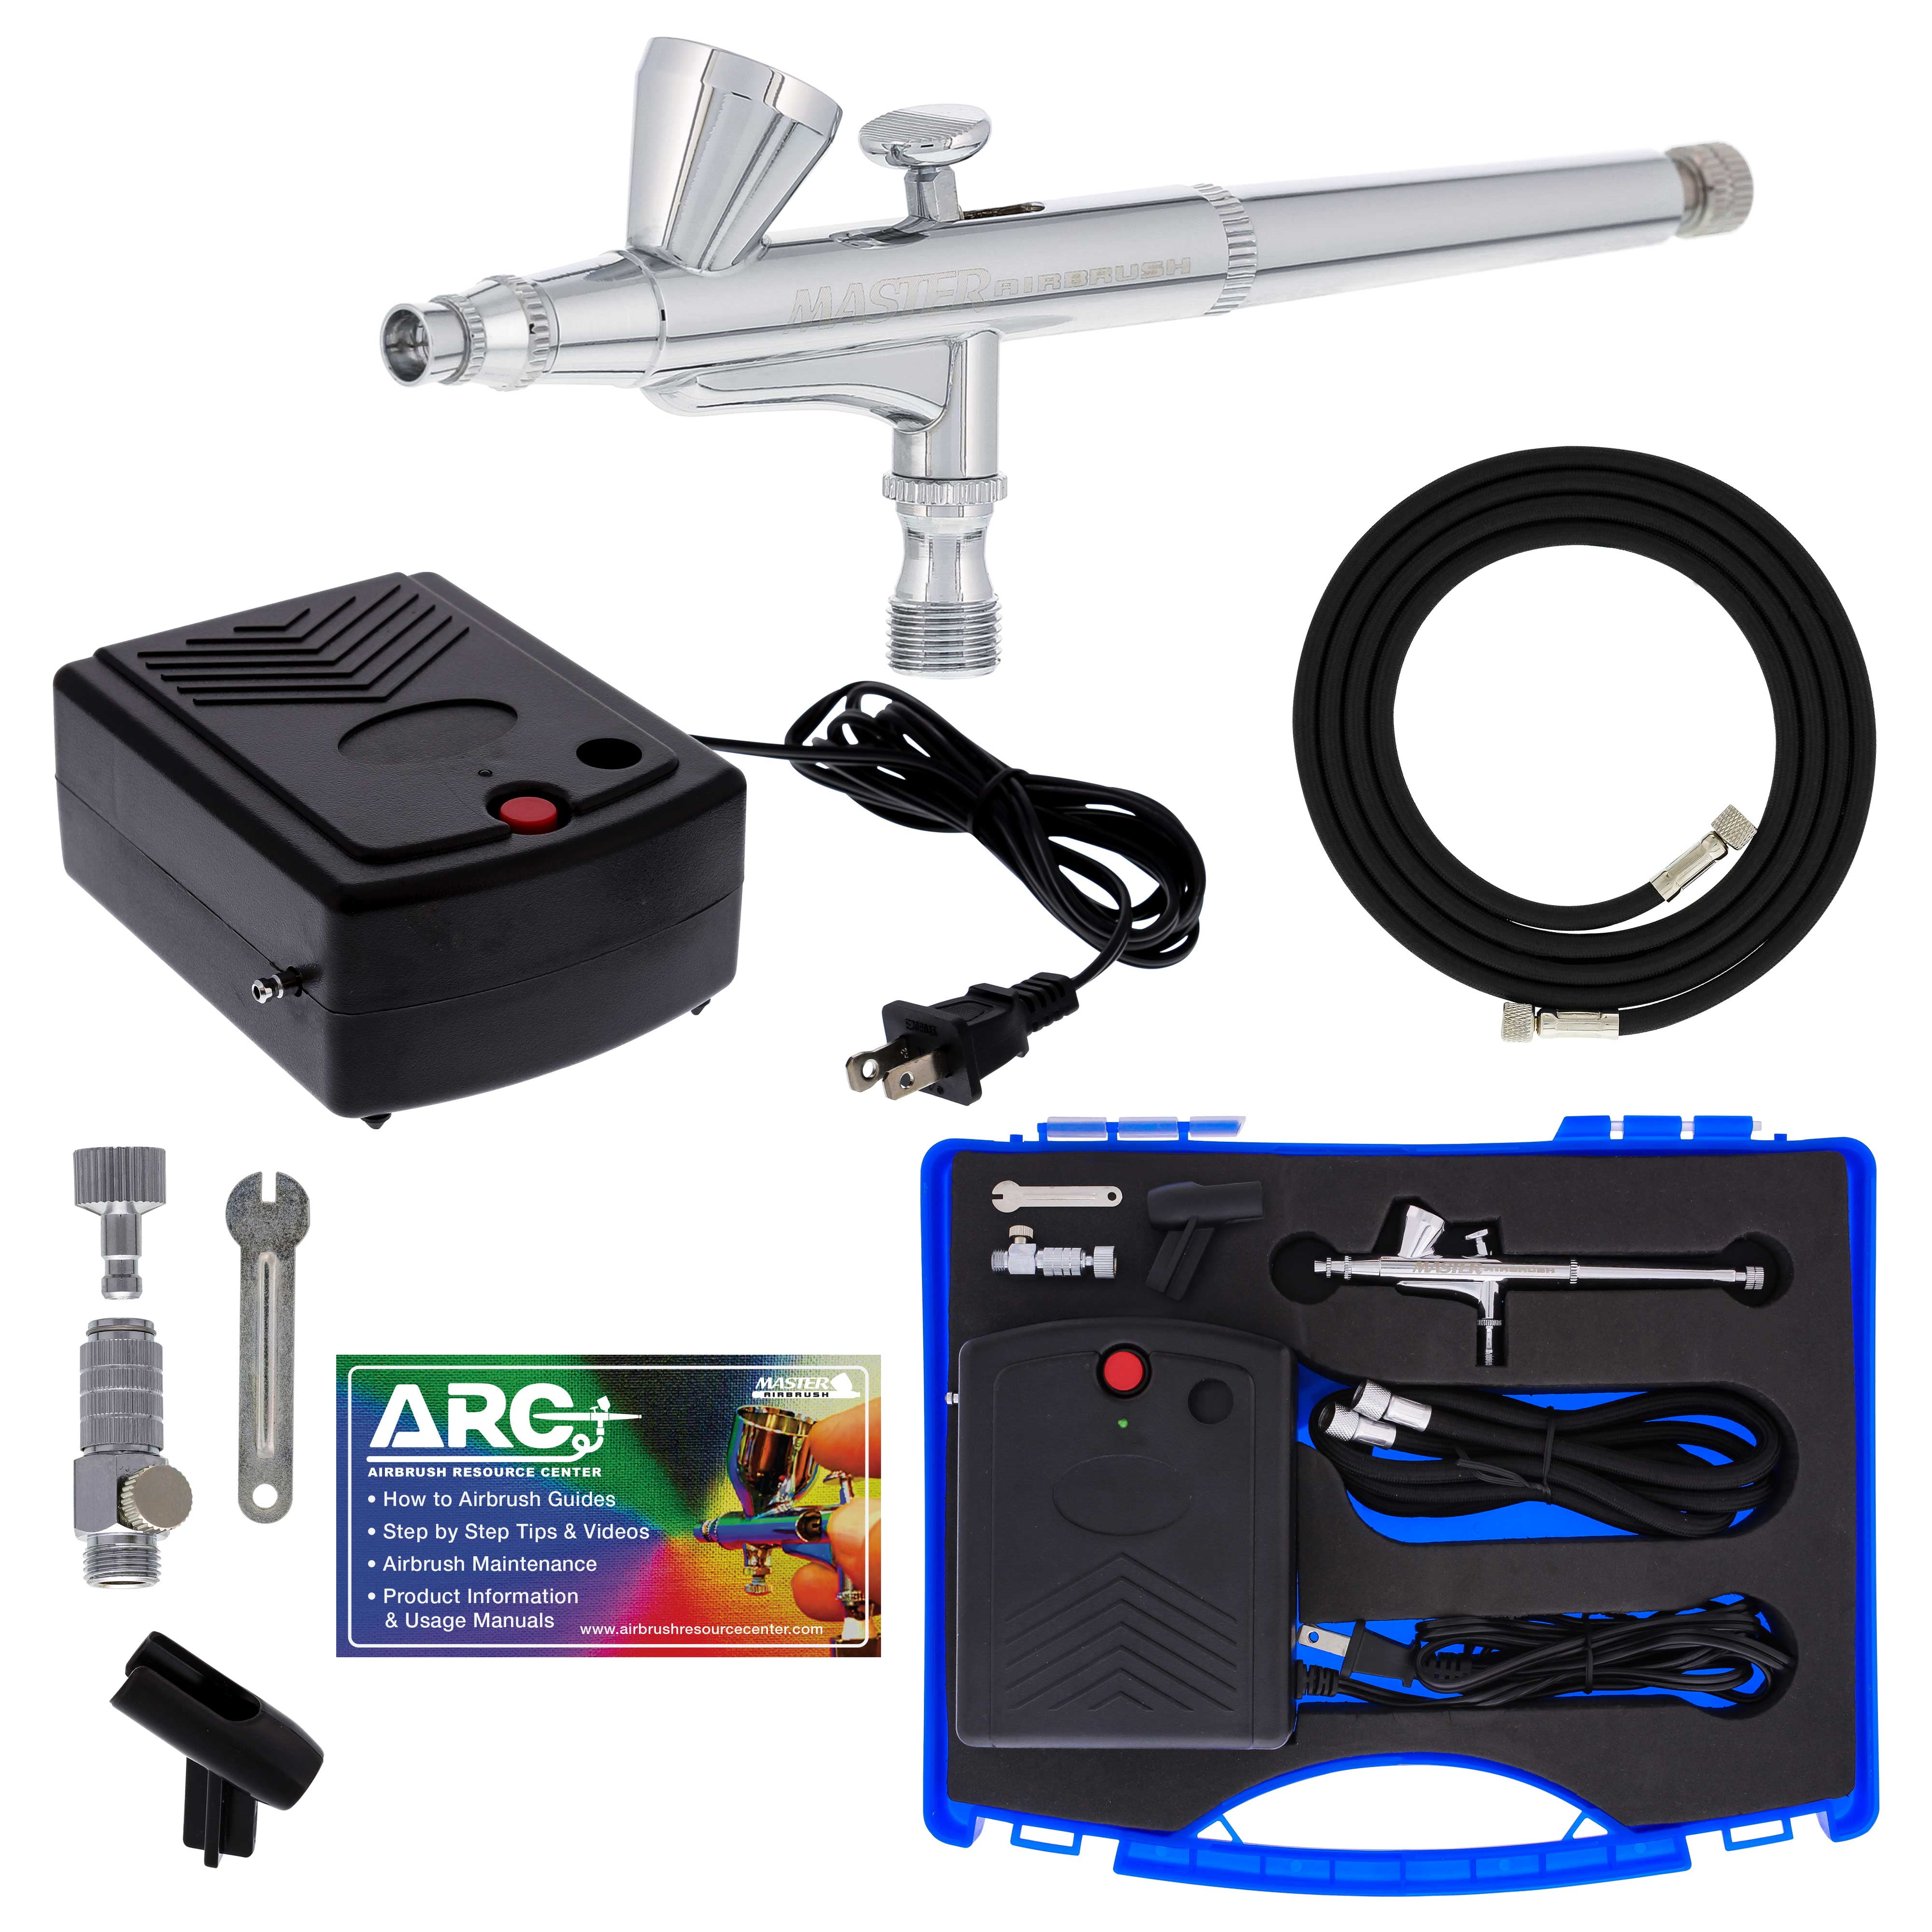 Master Airbrush Cool Runner II Dual Fan Air Storage Tank Compressor System  Kit with a G44 Fine Detail Control 0.2mm Tip Airbrush, 24 Color Acrylic